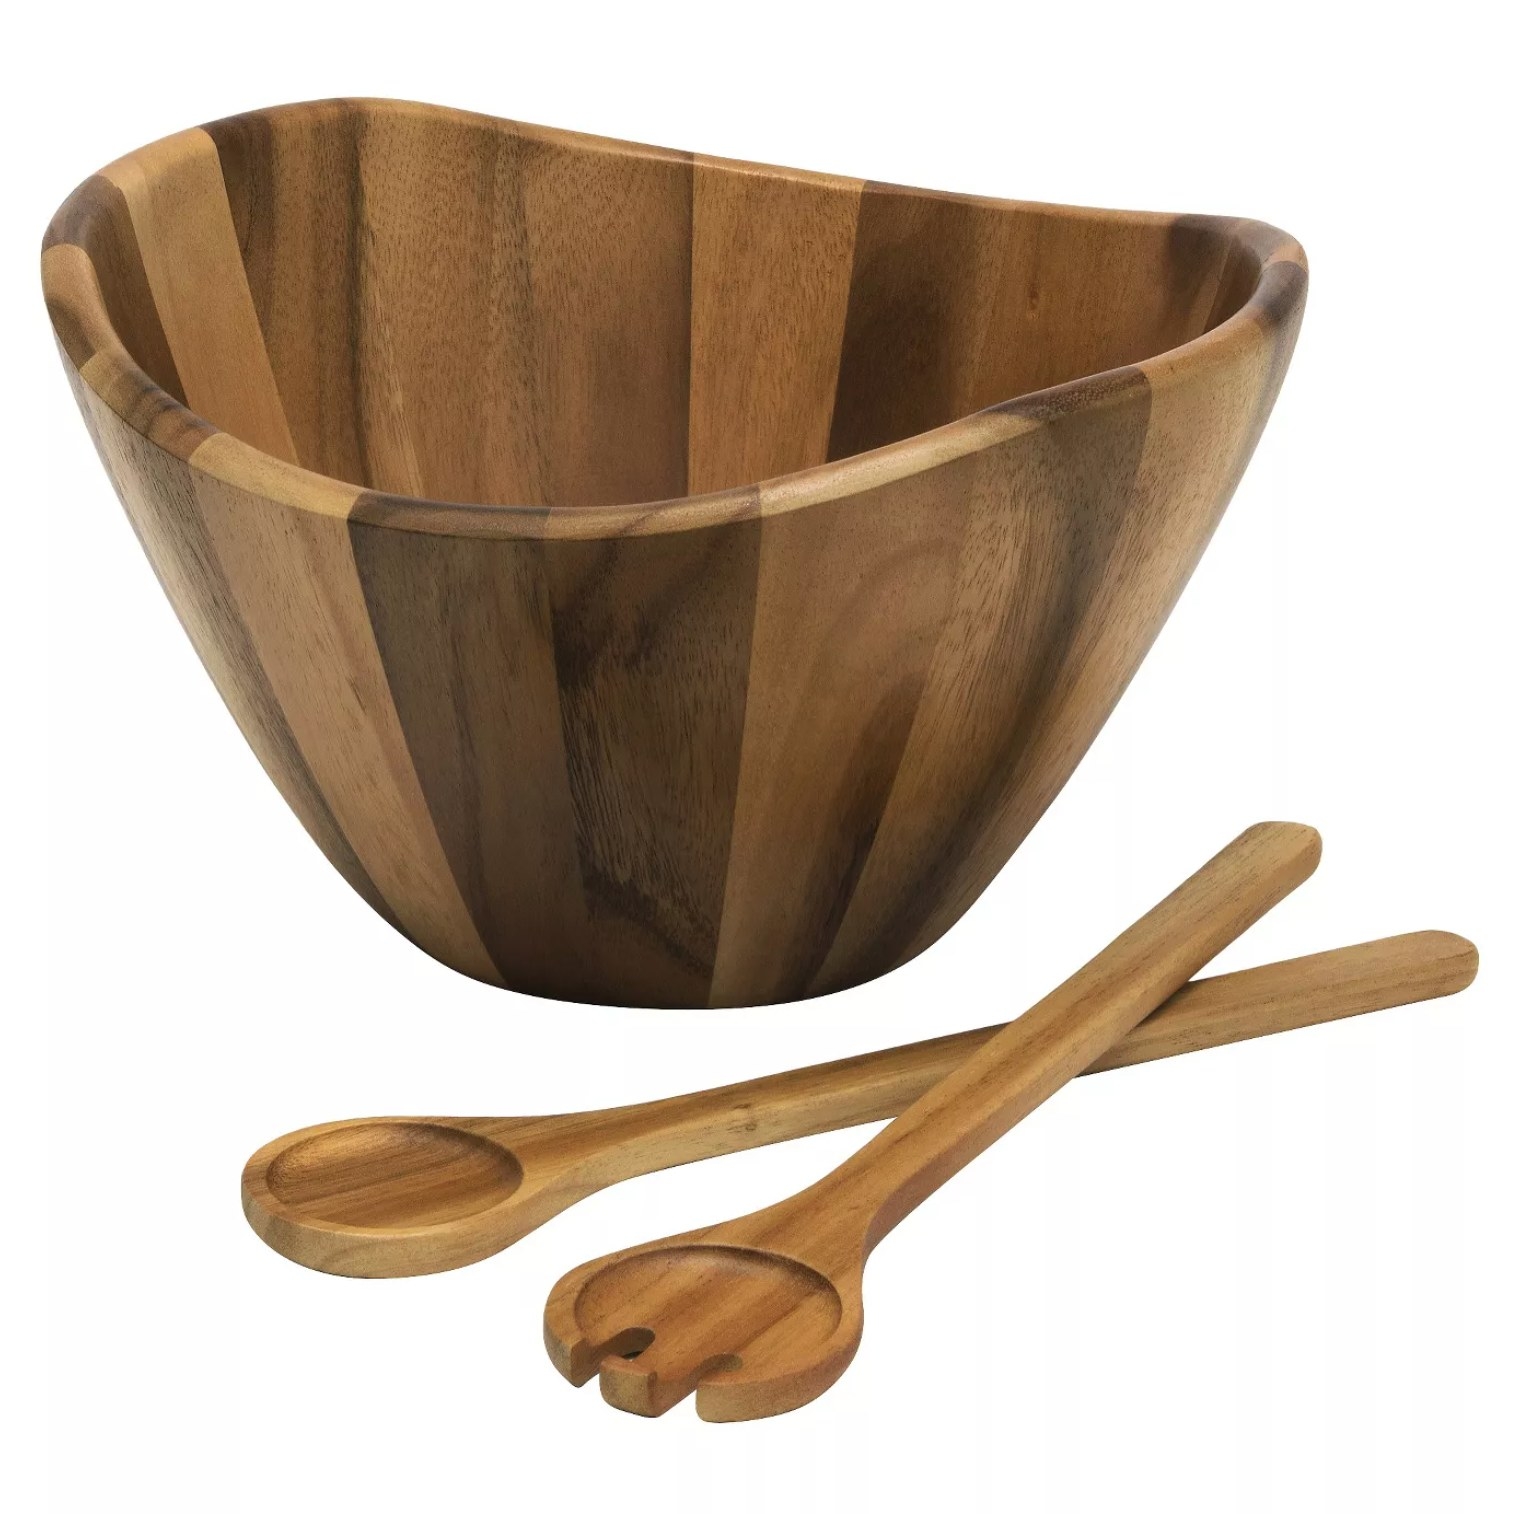 The wooden bowl and salad servers